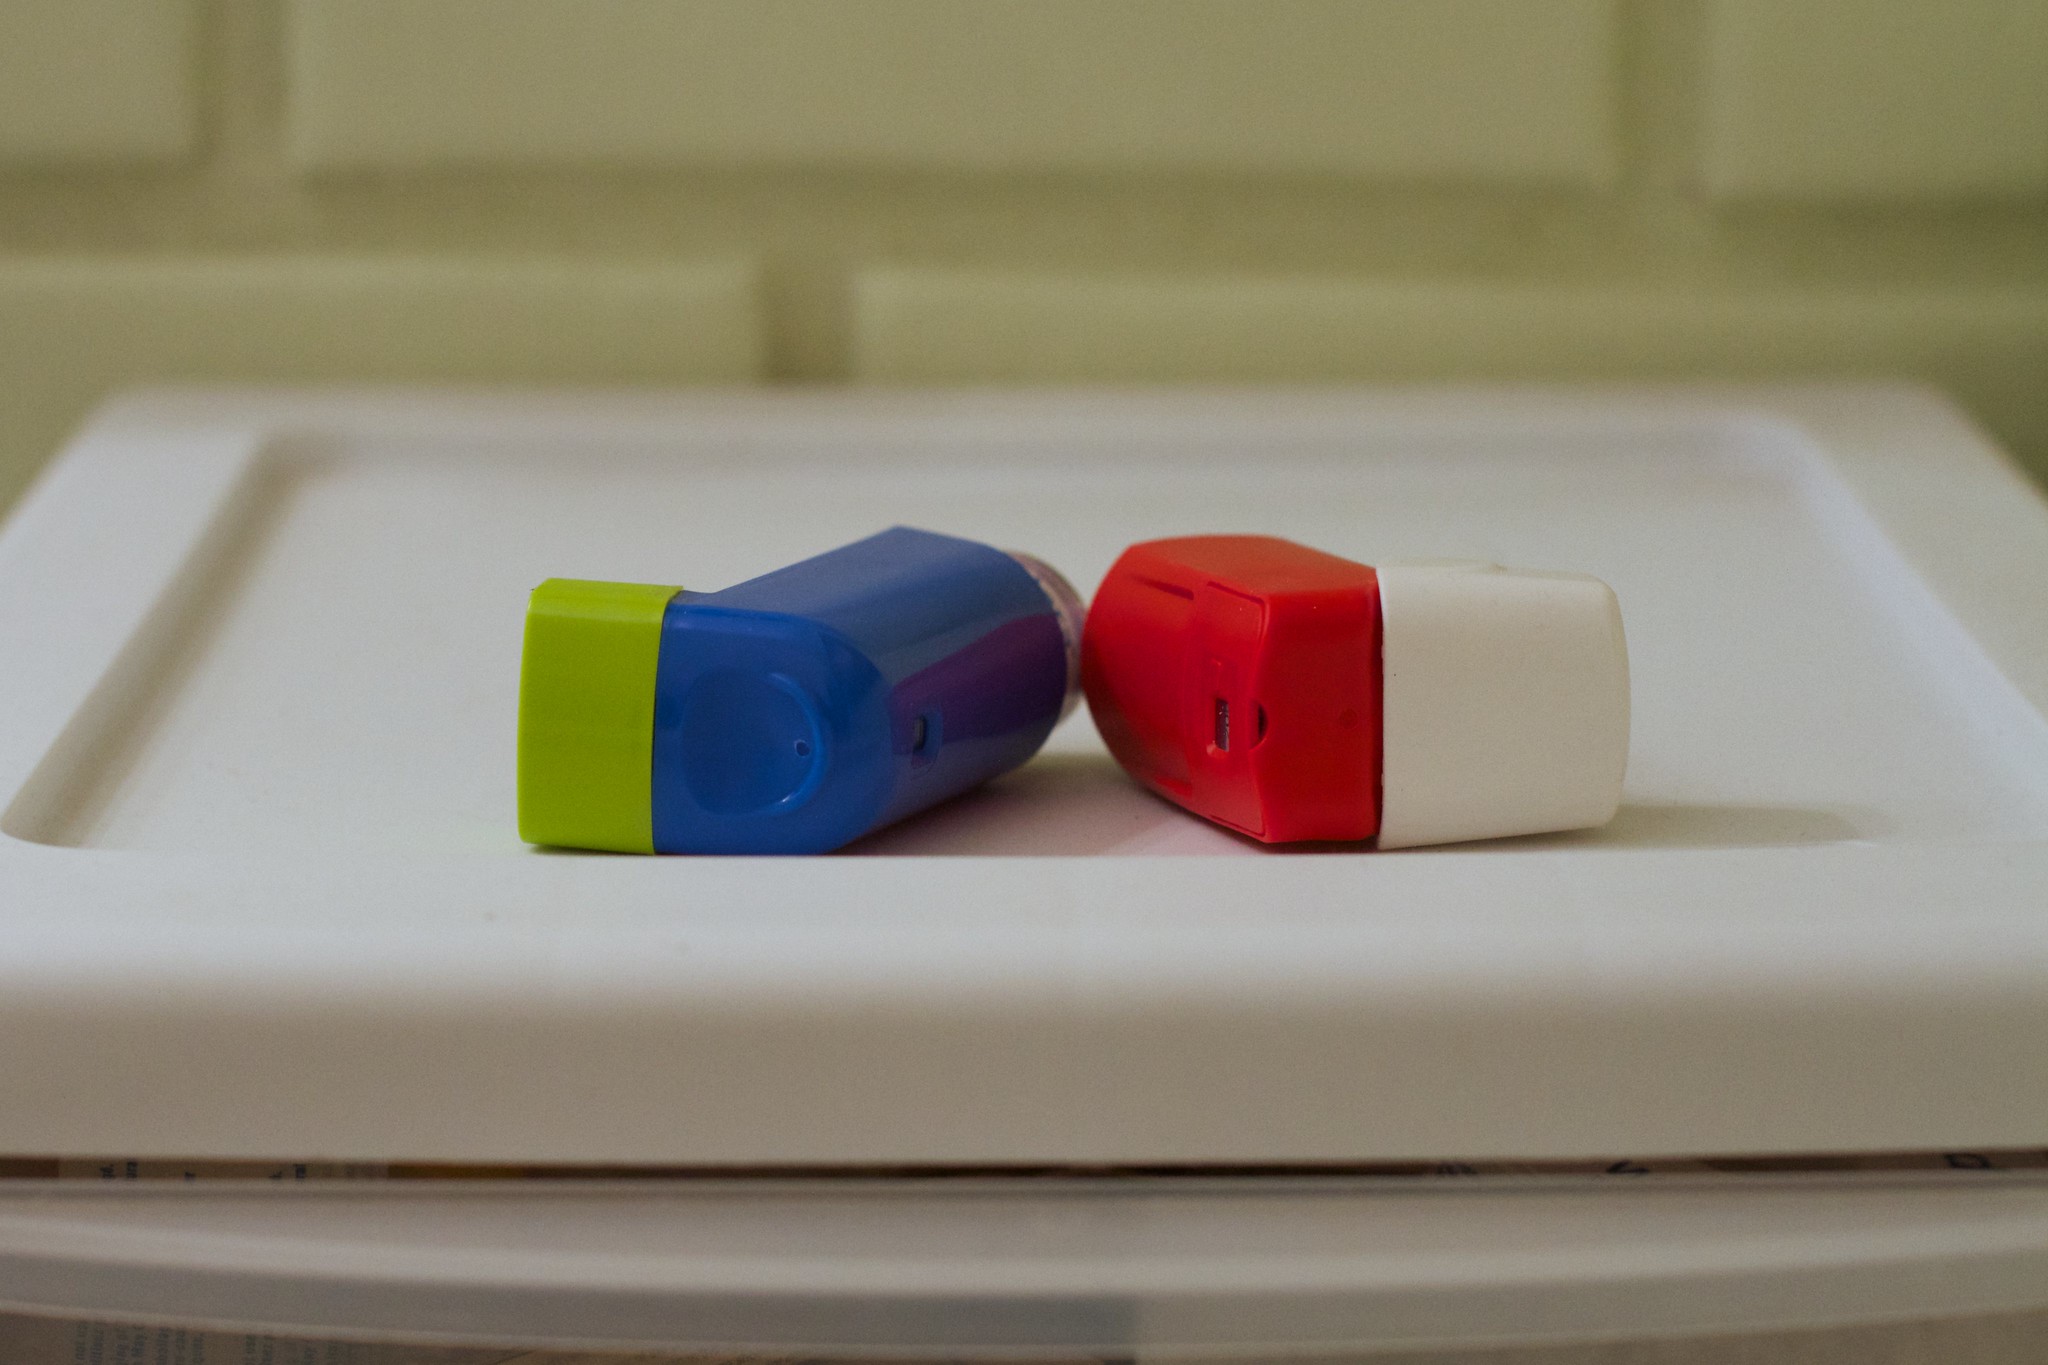 Two inhalers sitting on a counter